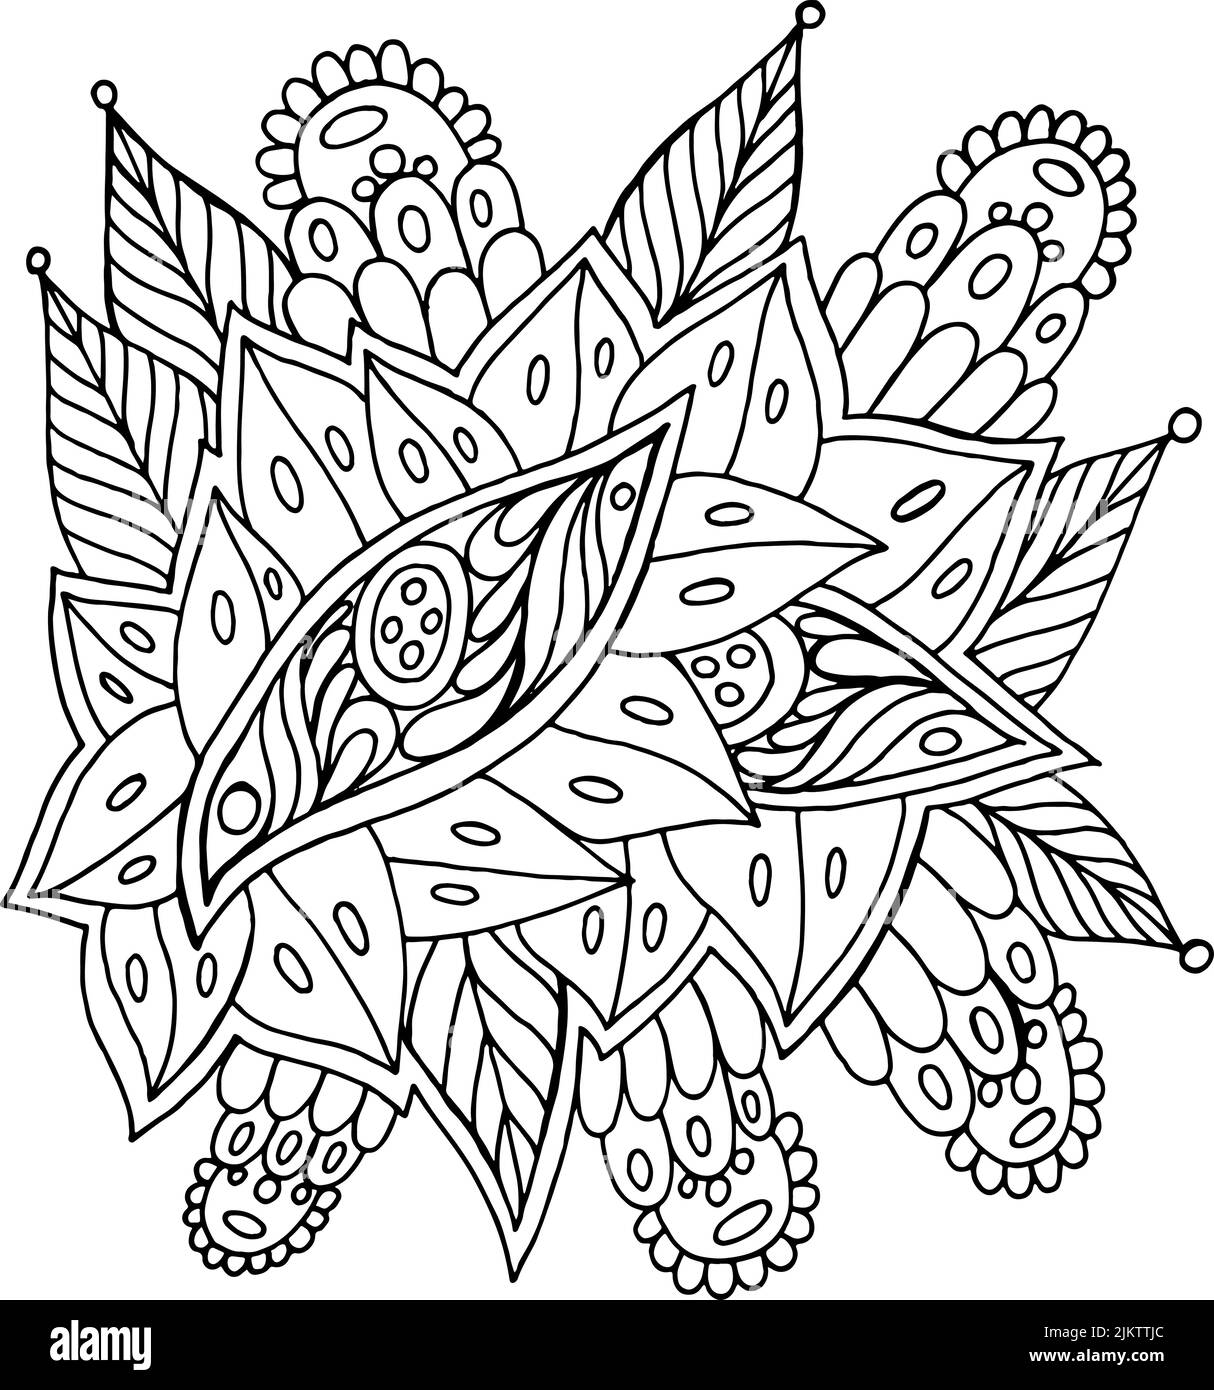 Psychedelic mandala with leaves and eyes detailed line art for coloring book adult coloring page antistress art therapy vector artwork stock vector image art